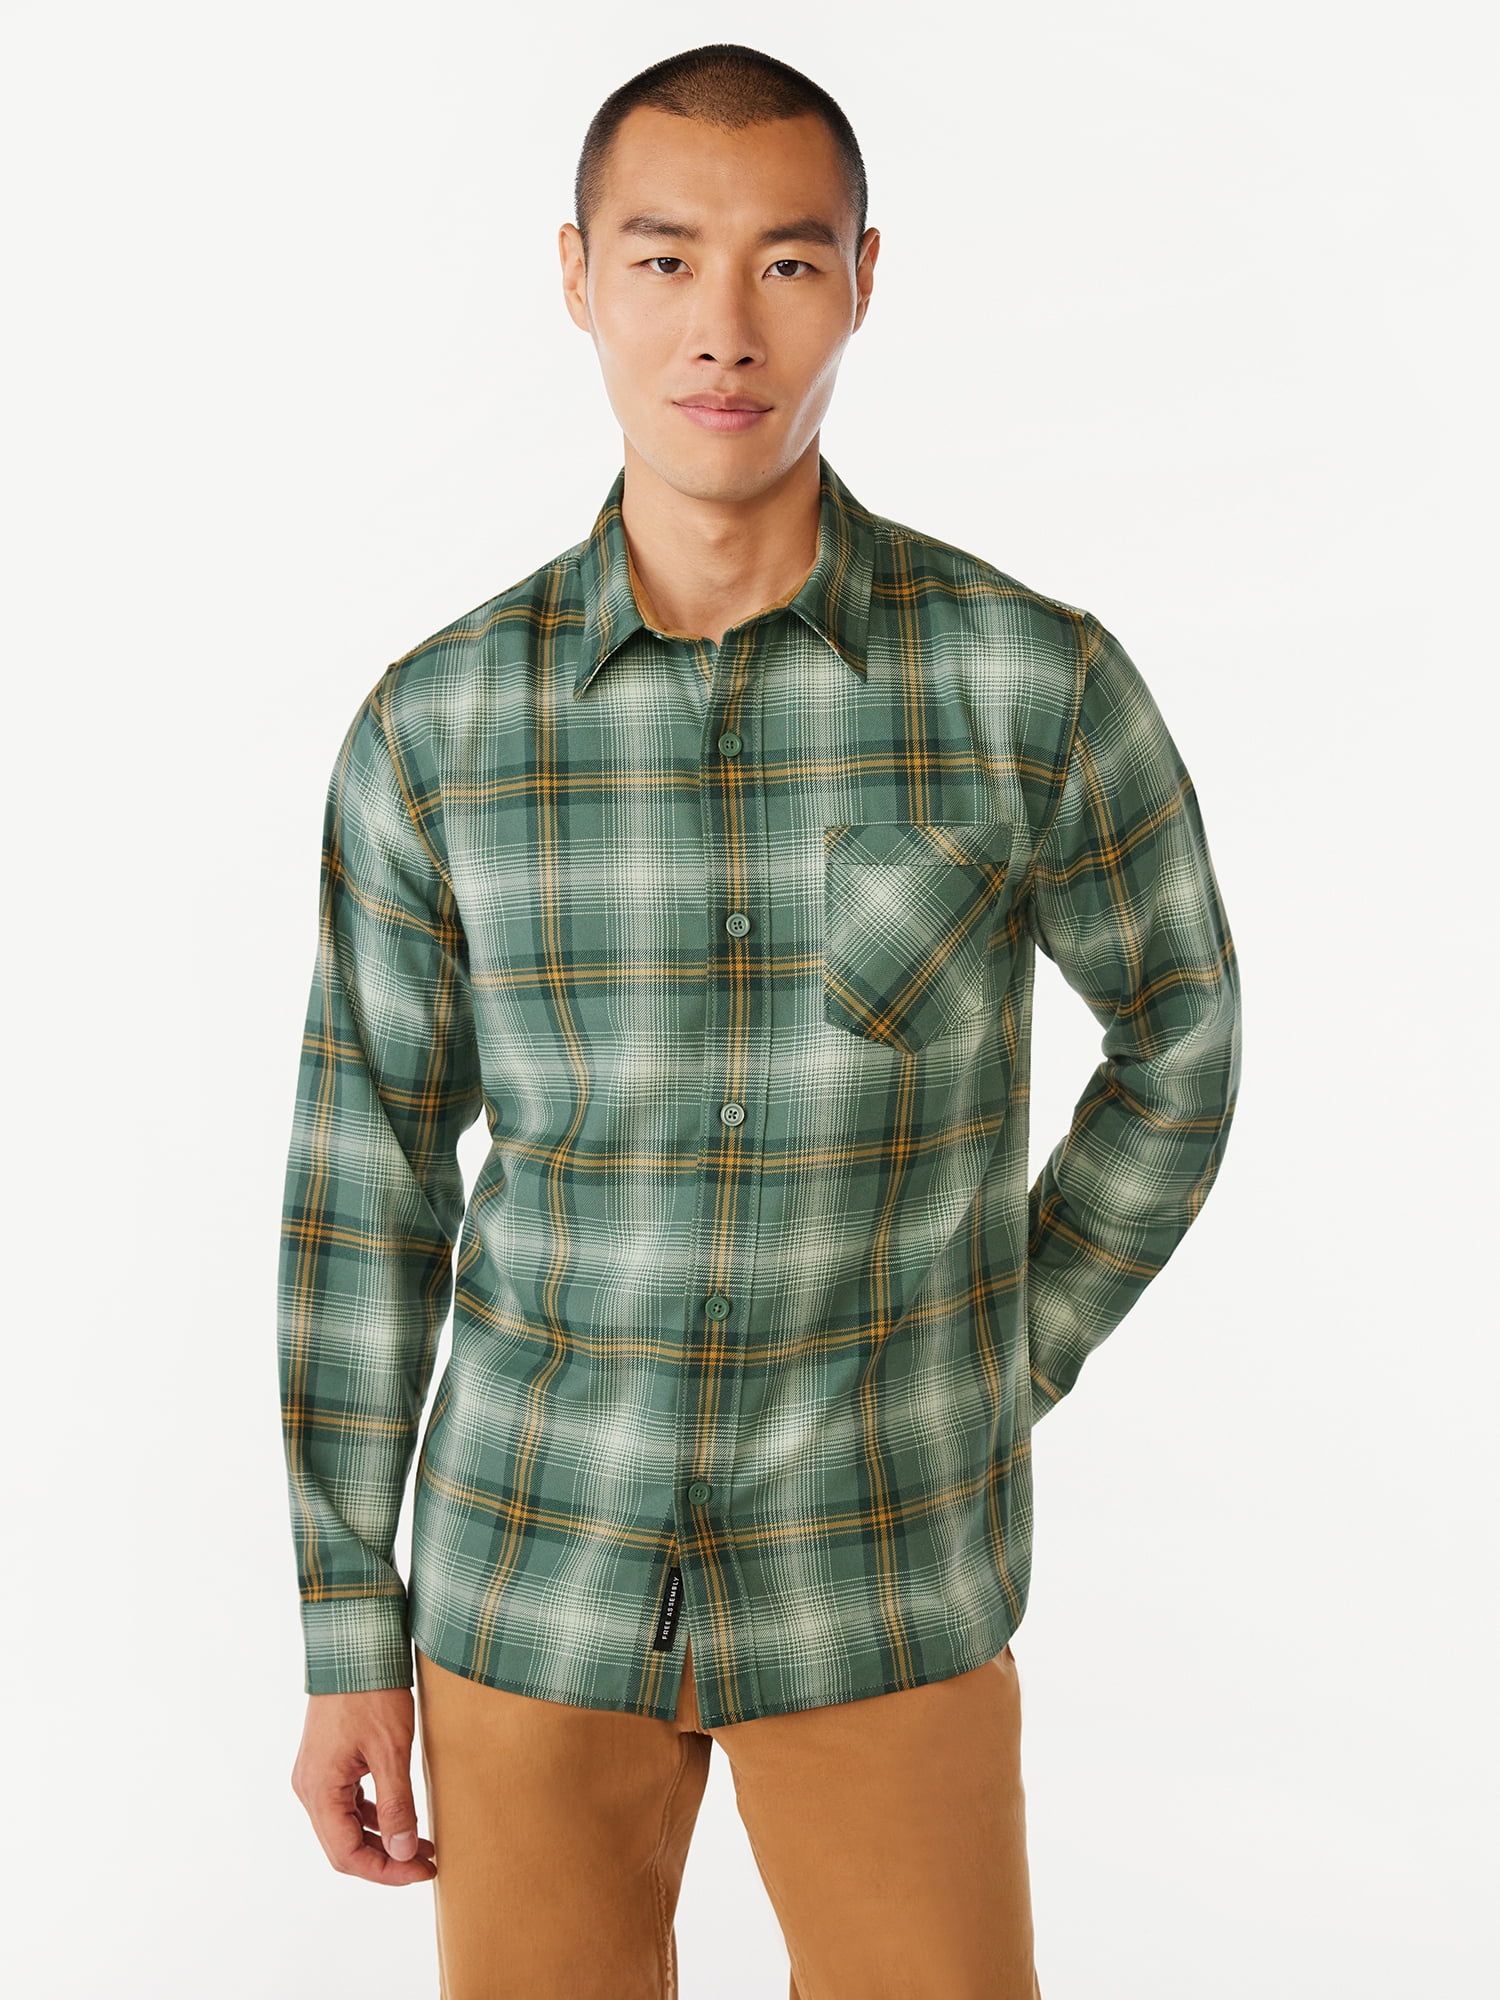 Free Assembly Men's Lightweight Plaid Flannel Shirt with Long Sleeves, Sizes XS-3XL | Walmart (US)